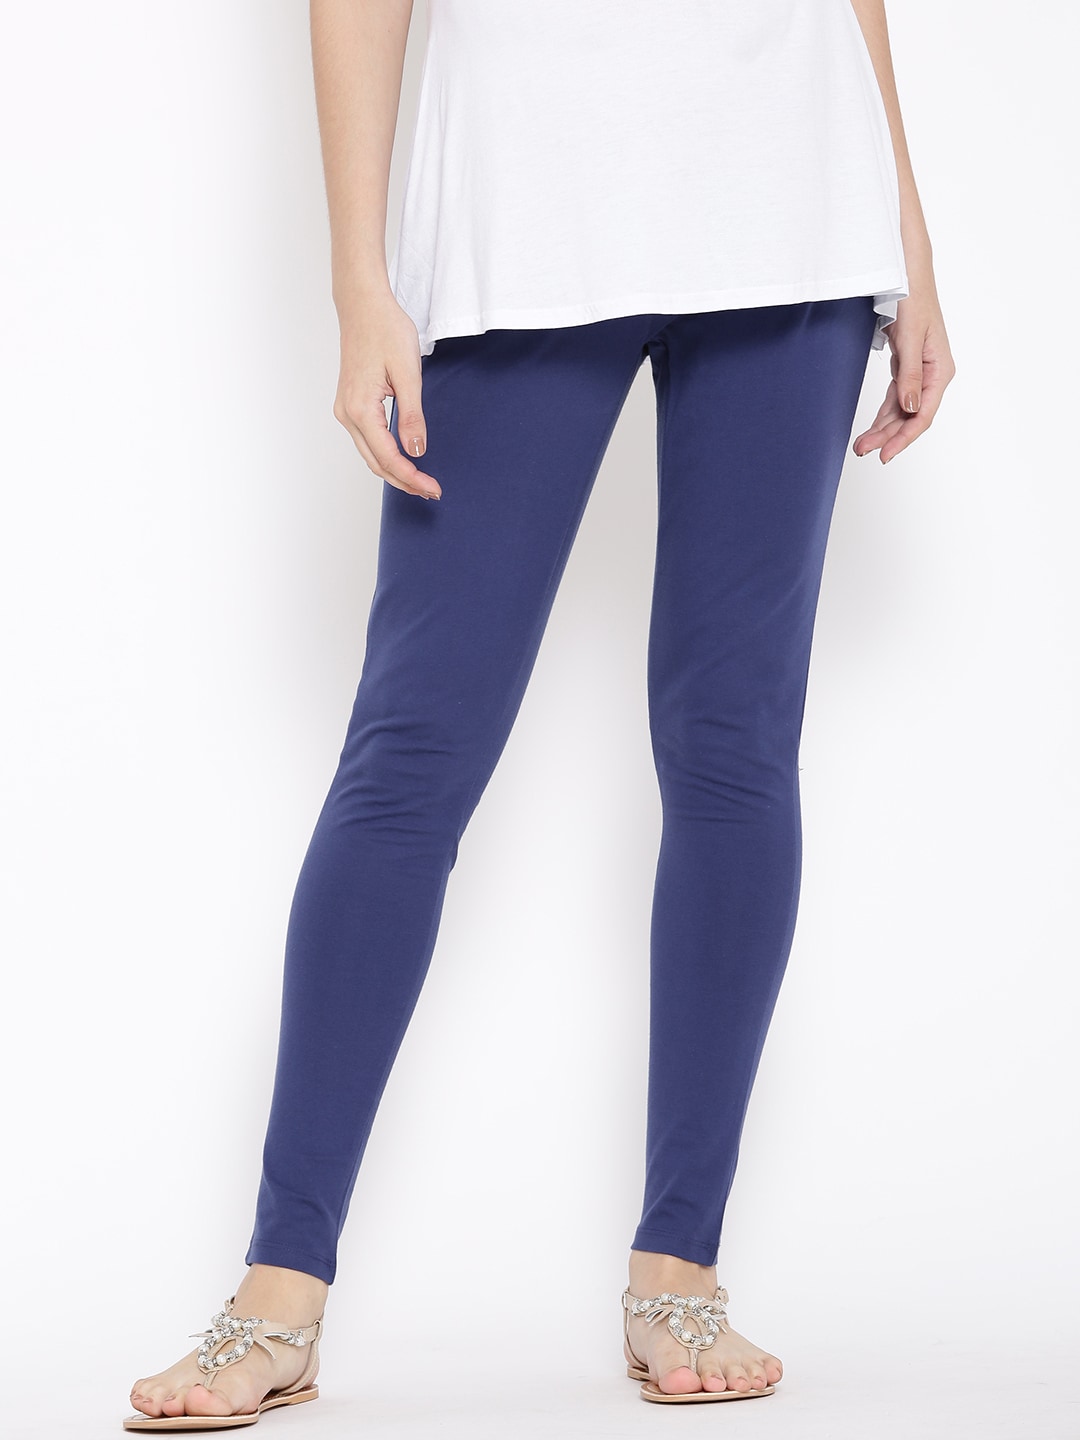 W Blue Ankle-Length Maternity Leggings Price in India